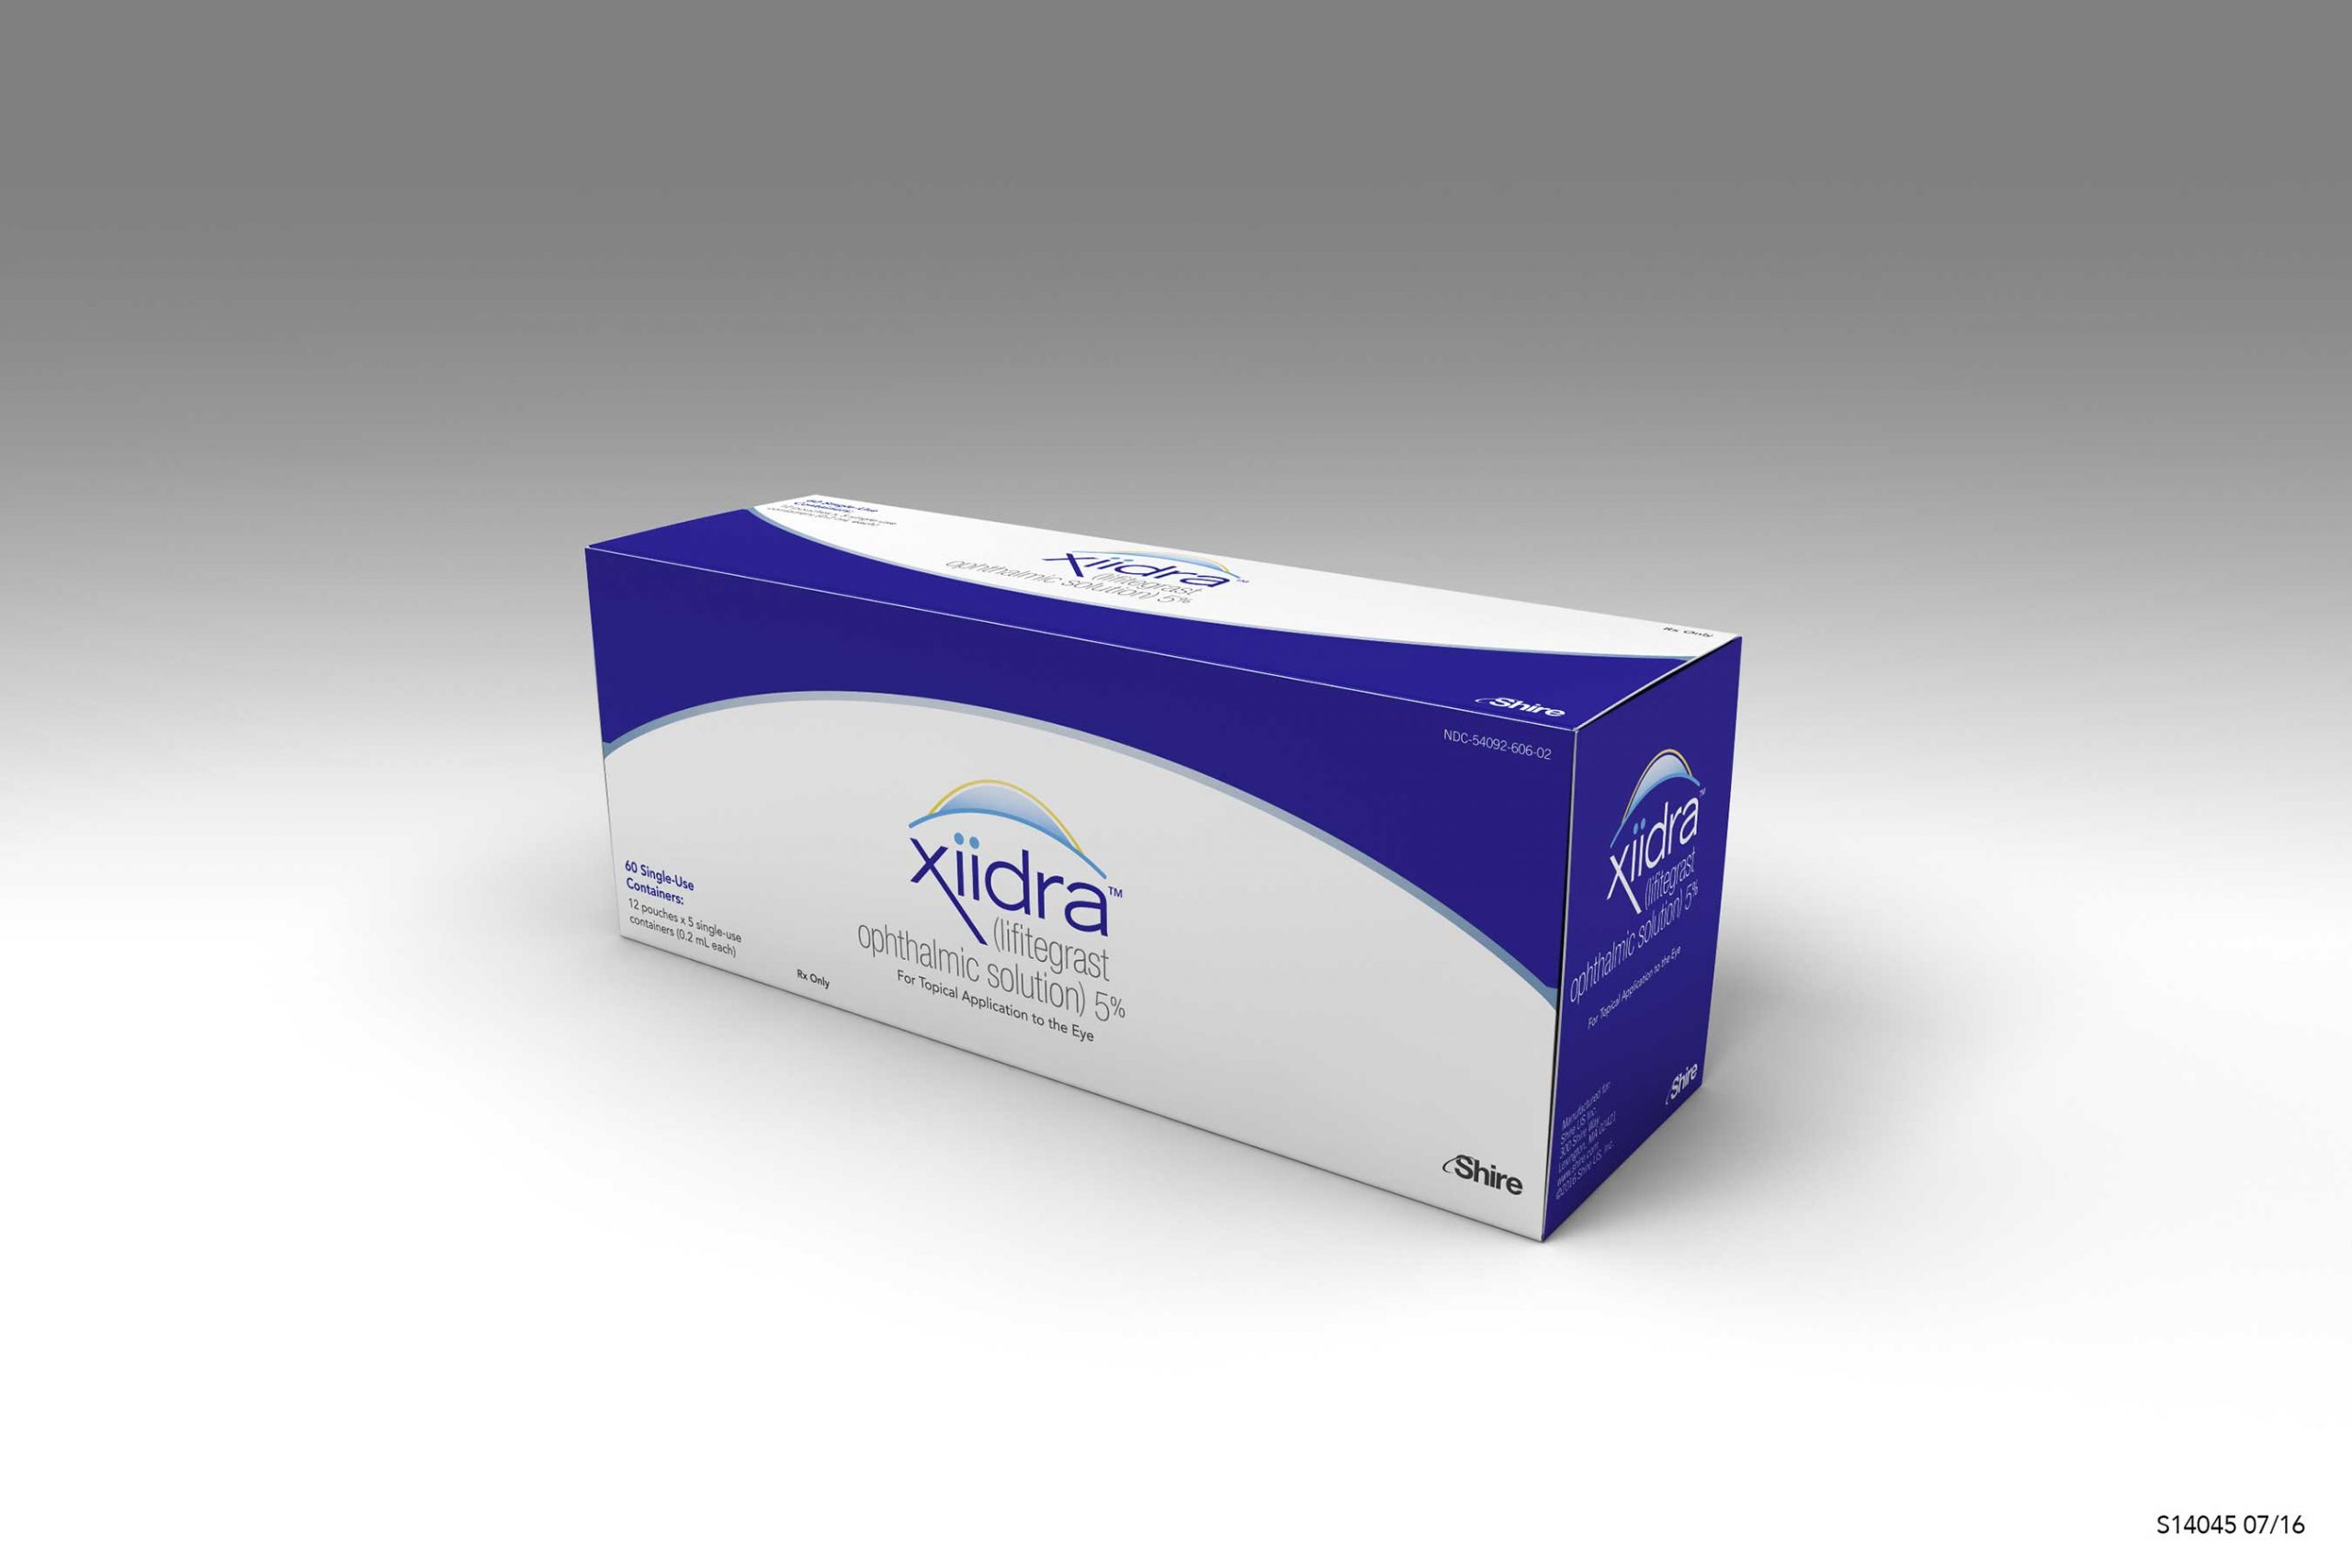 xiidratm-lifitegrast-ophthalmic-solution-5-30-day-supply-6-HR